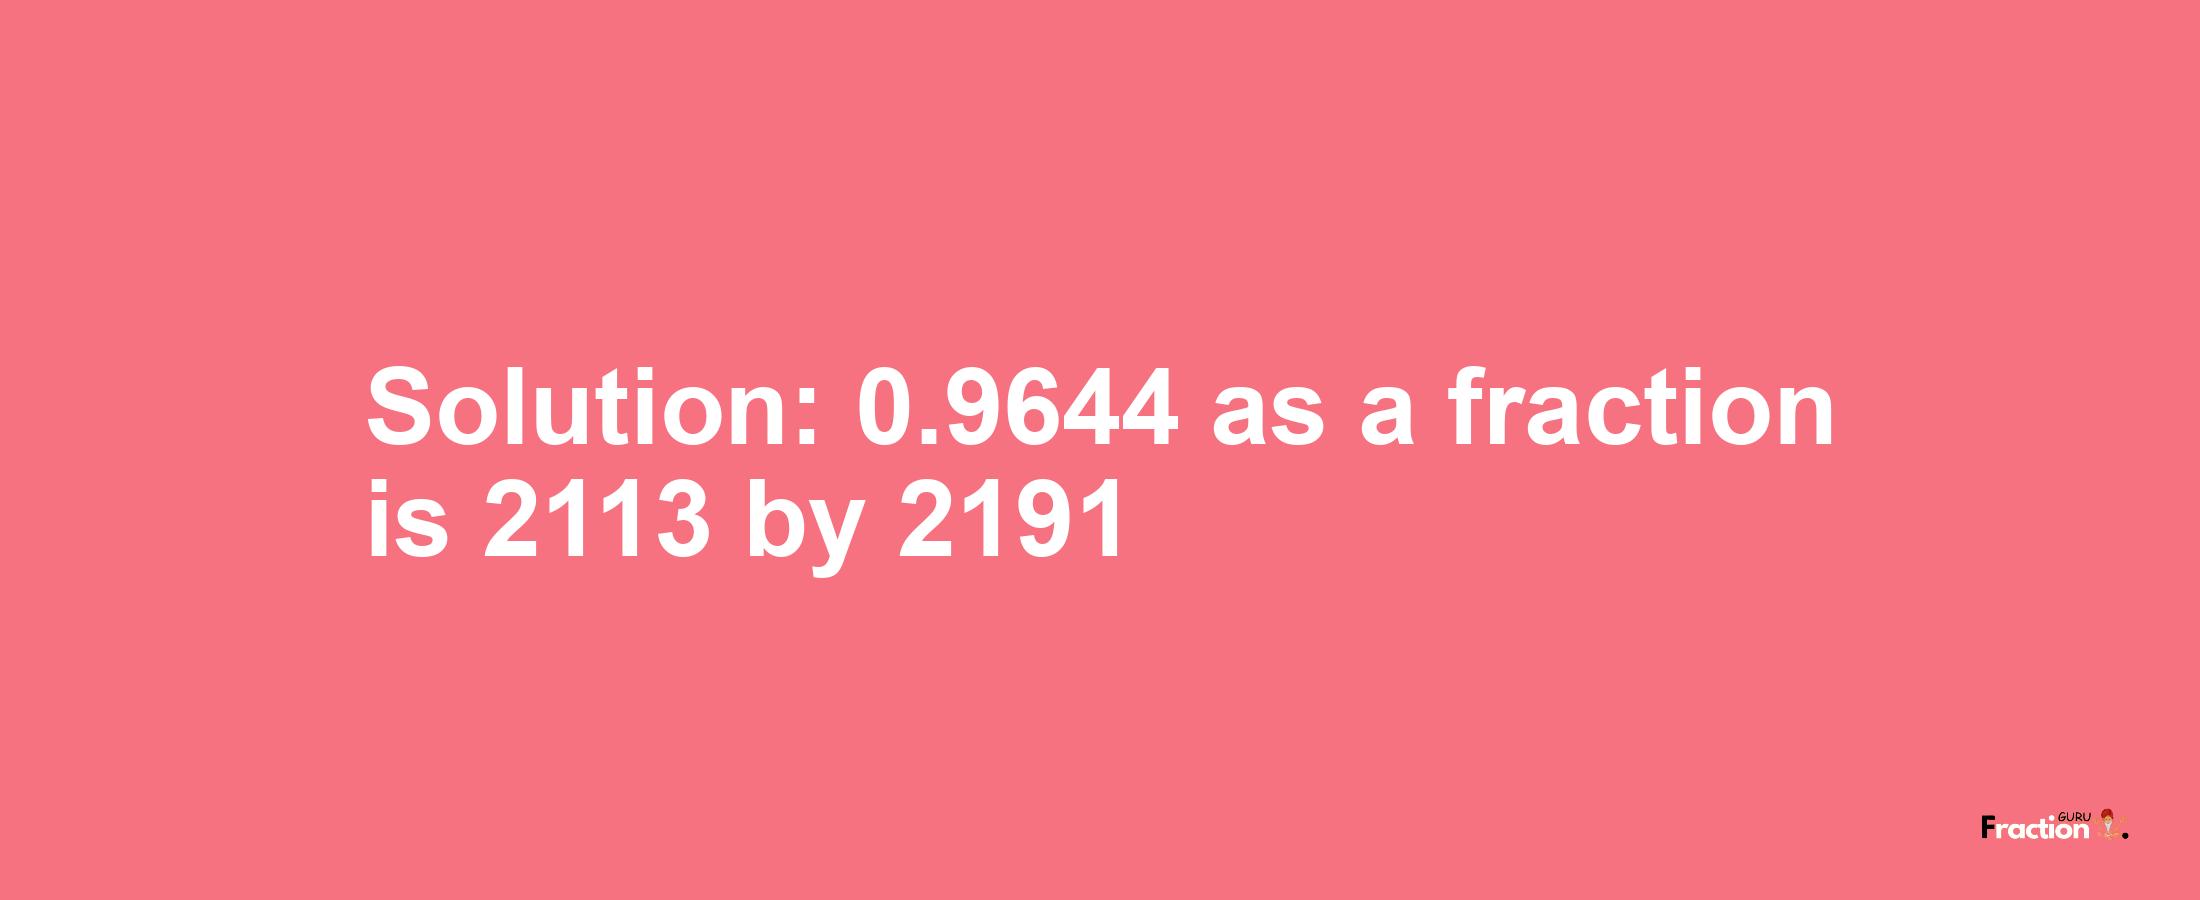 Solution:0.9644 as a fraction is 2113/2191